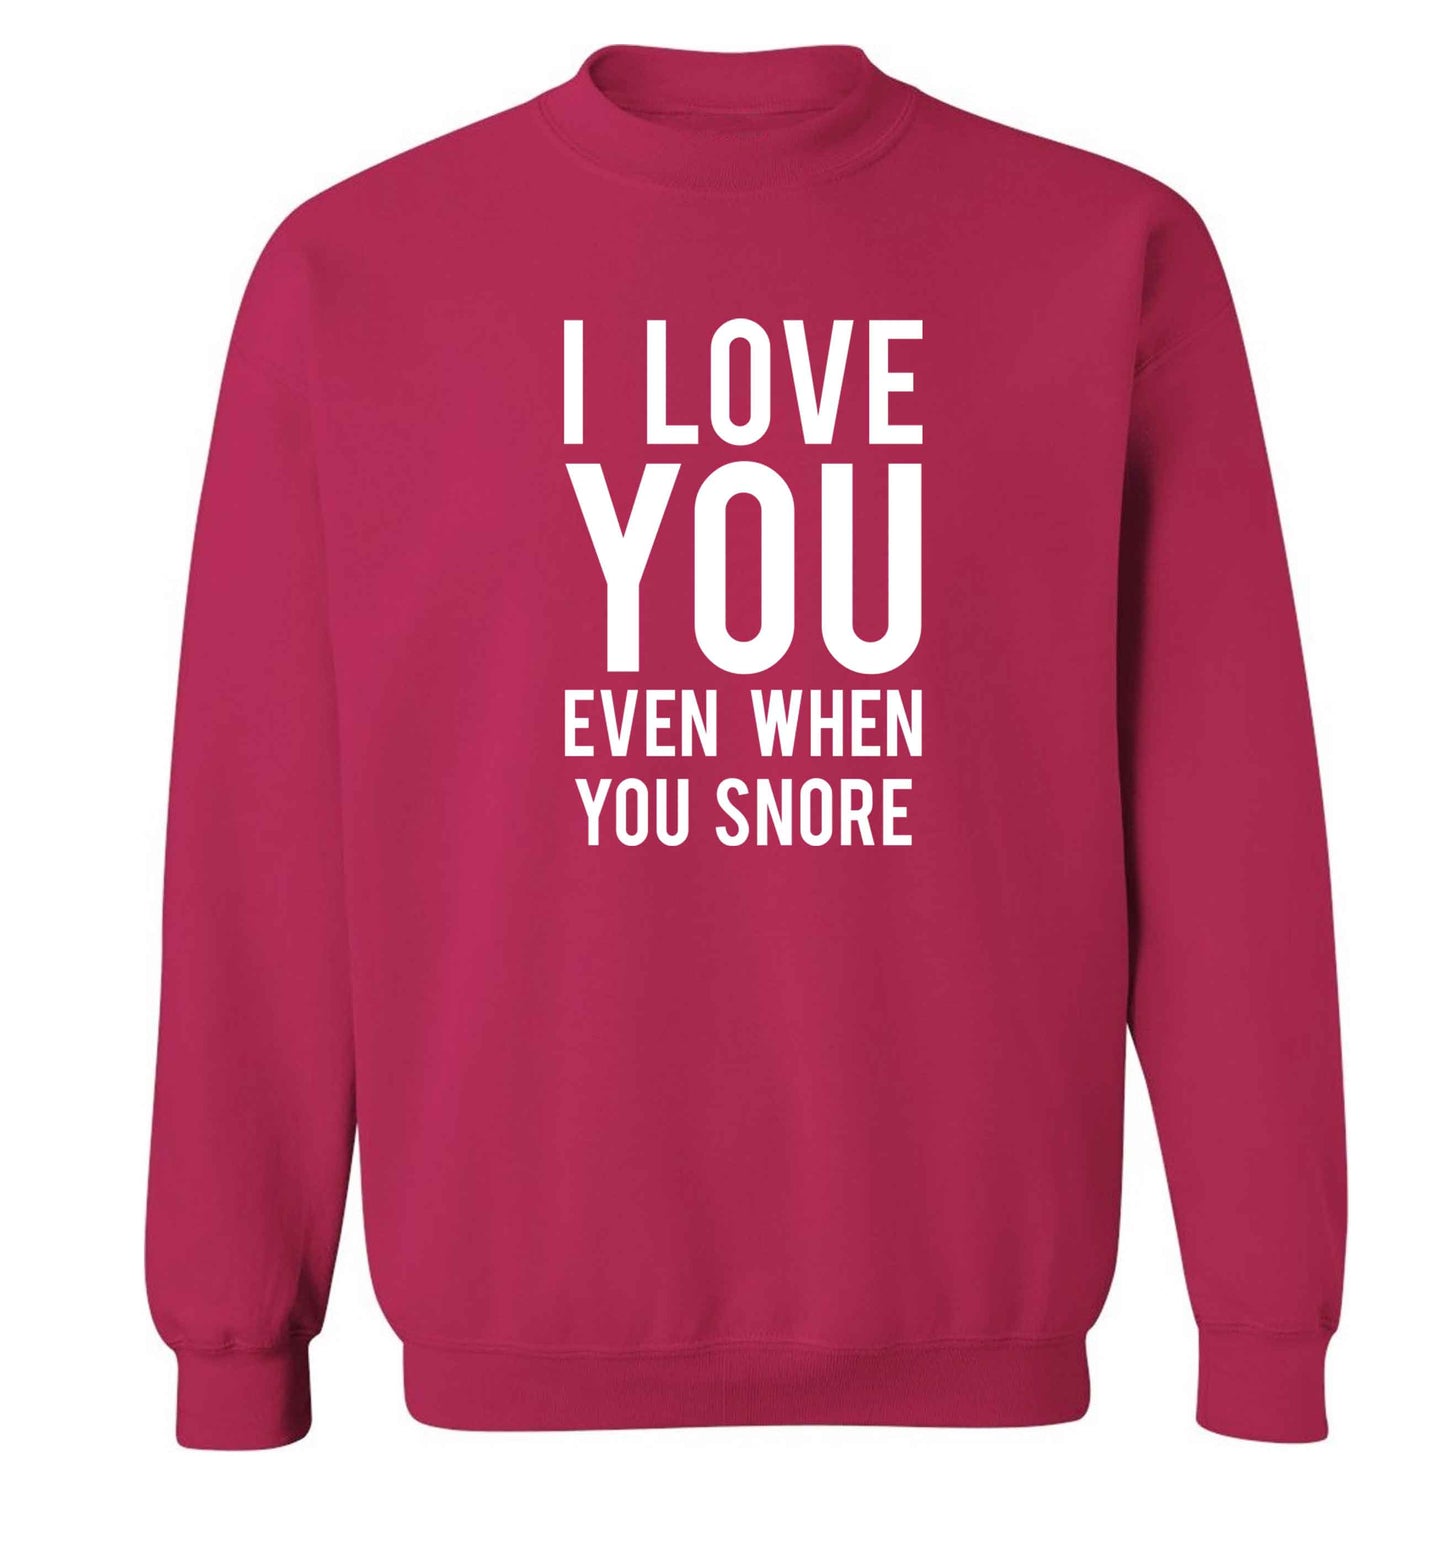 I love you even when you snore adult's unisex pink sweater 2XL